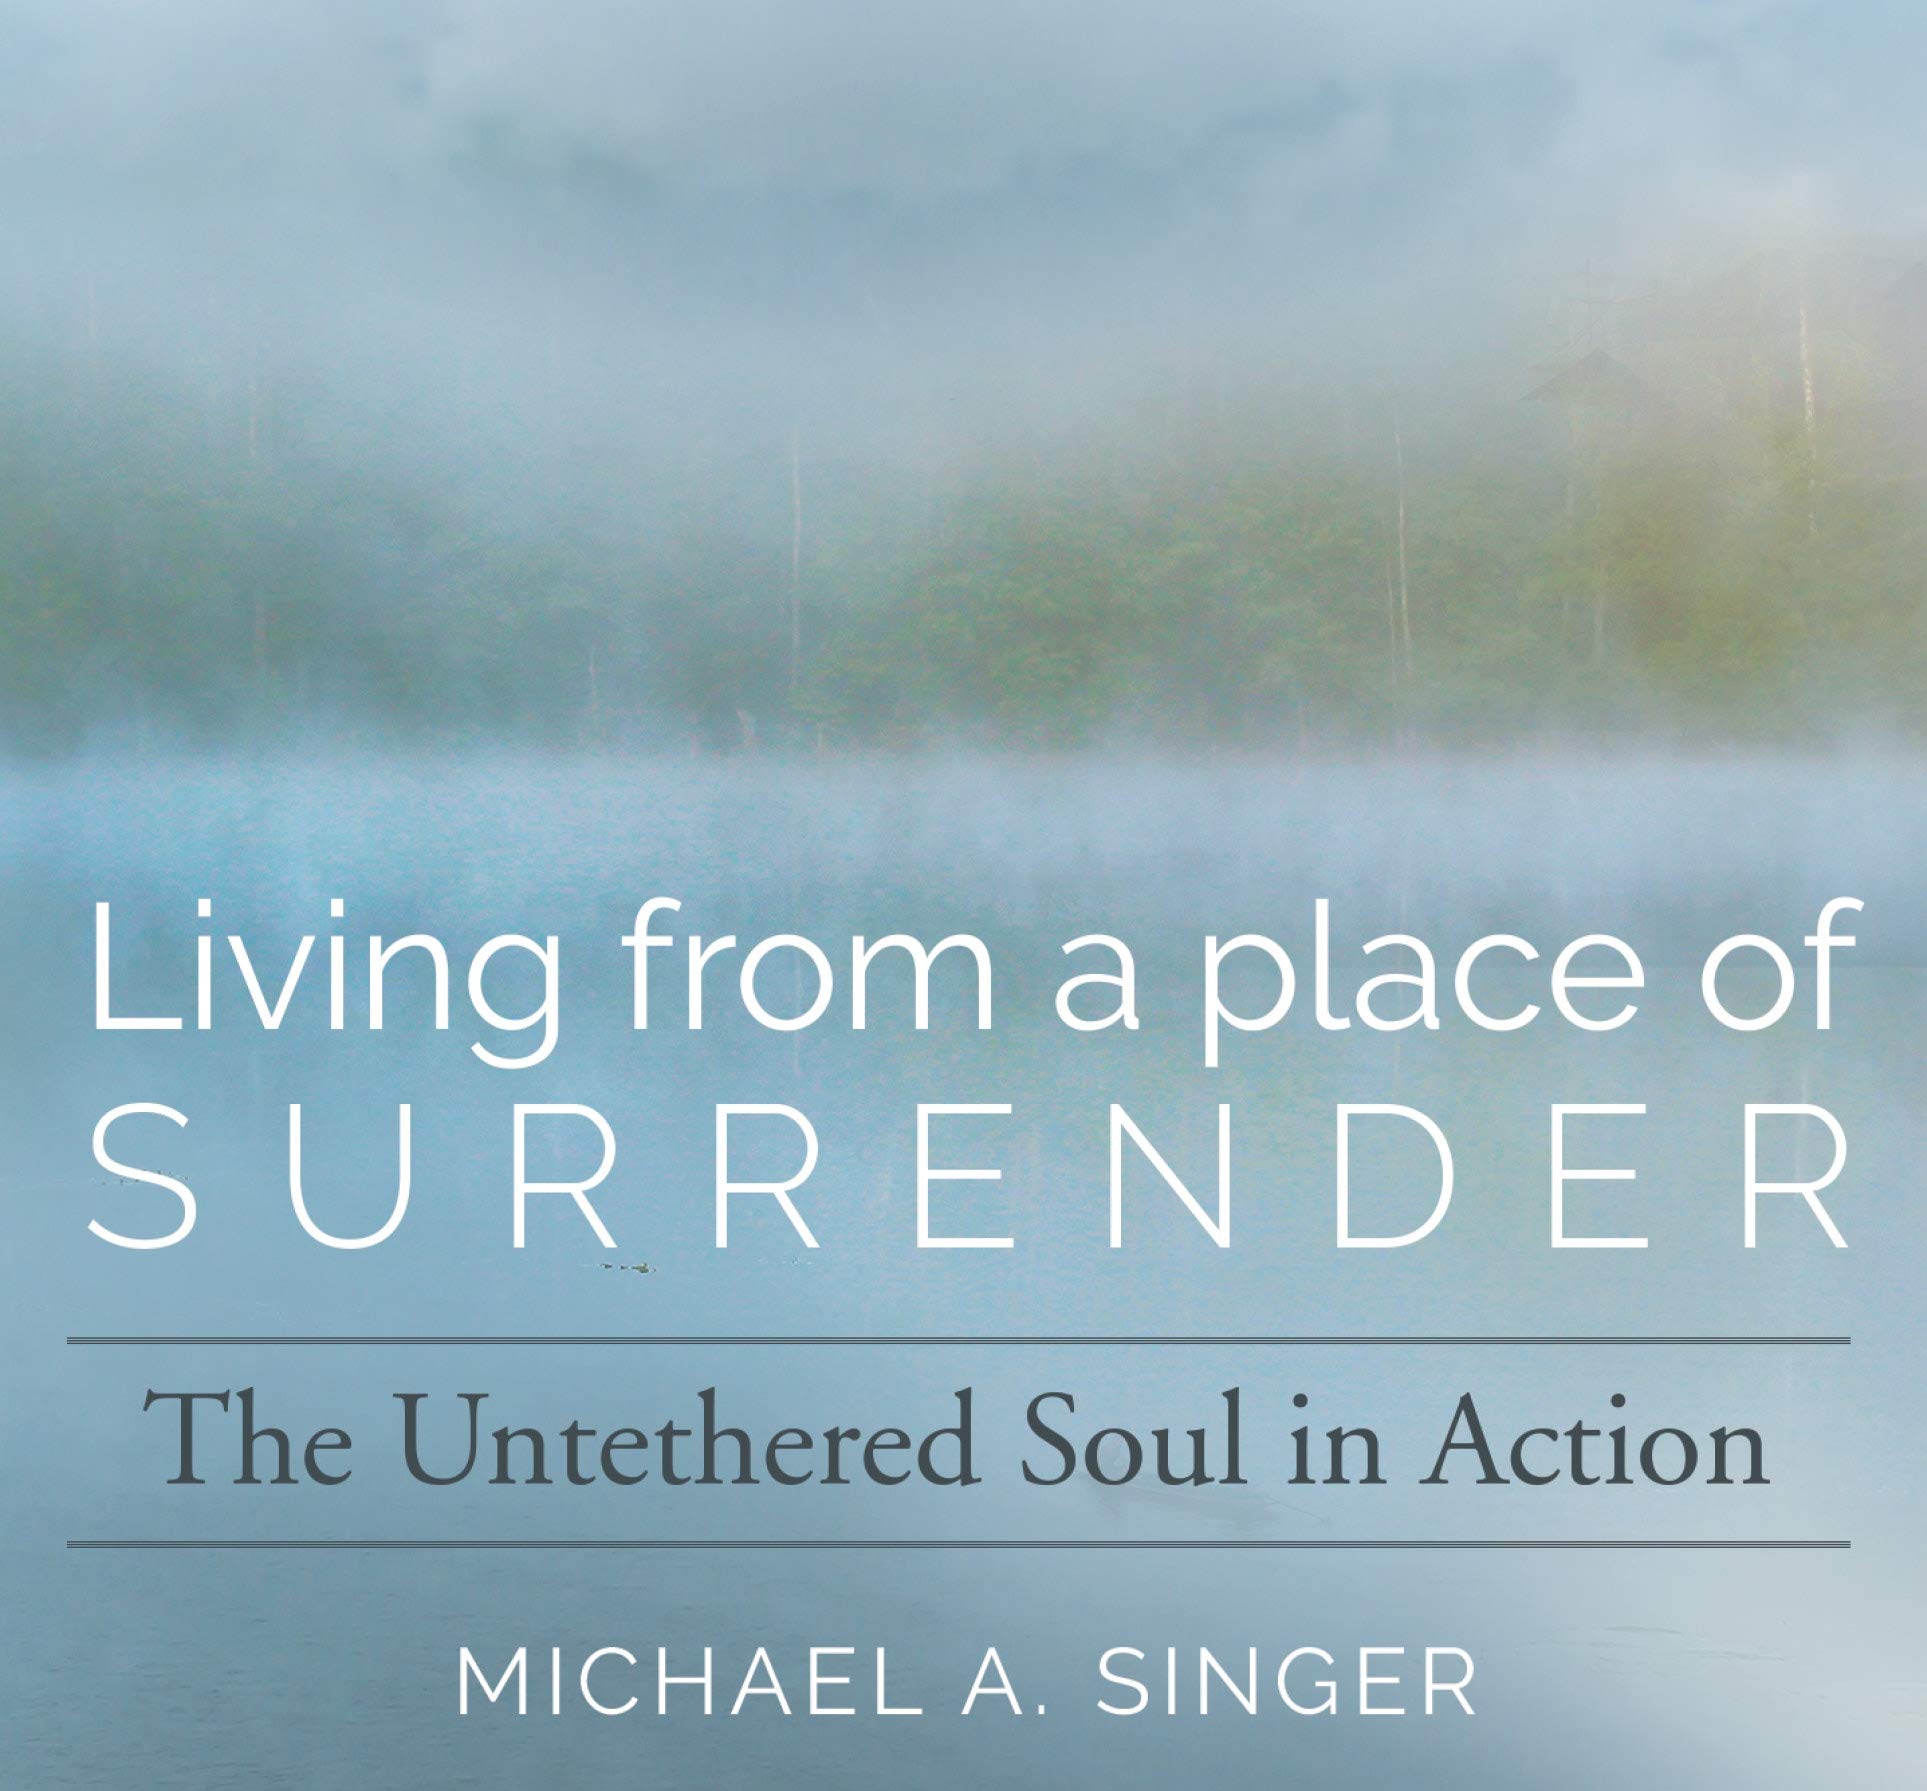 Michael Singer - Living From A Place Of Surrender